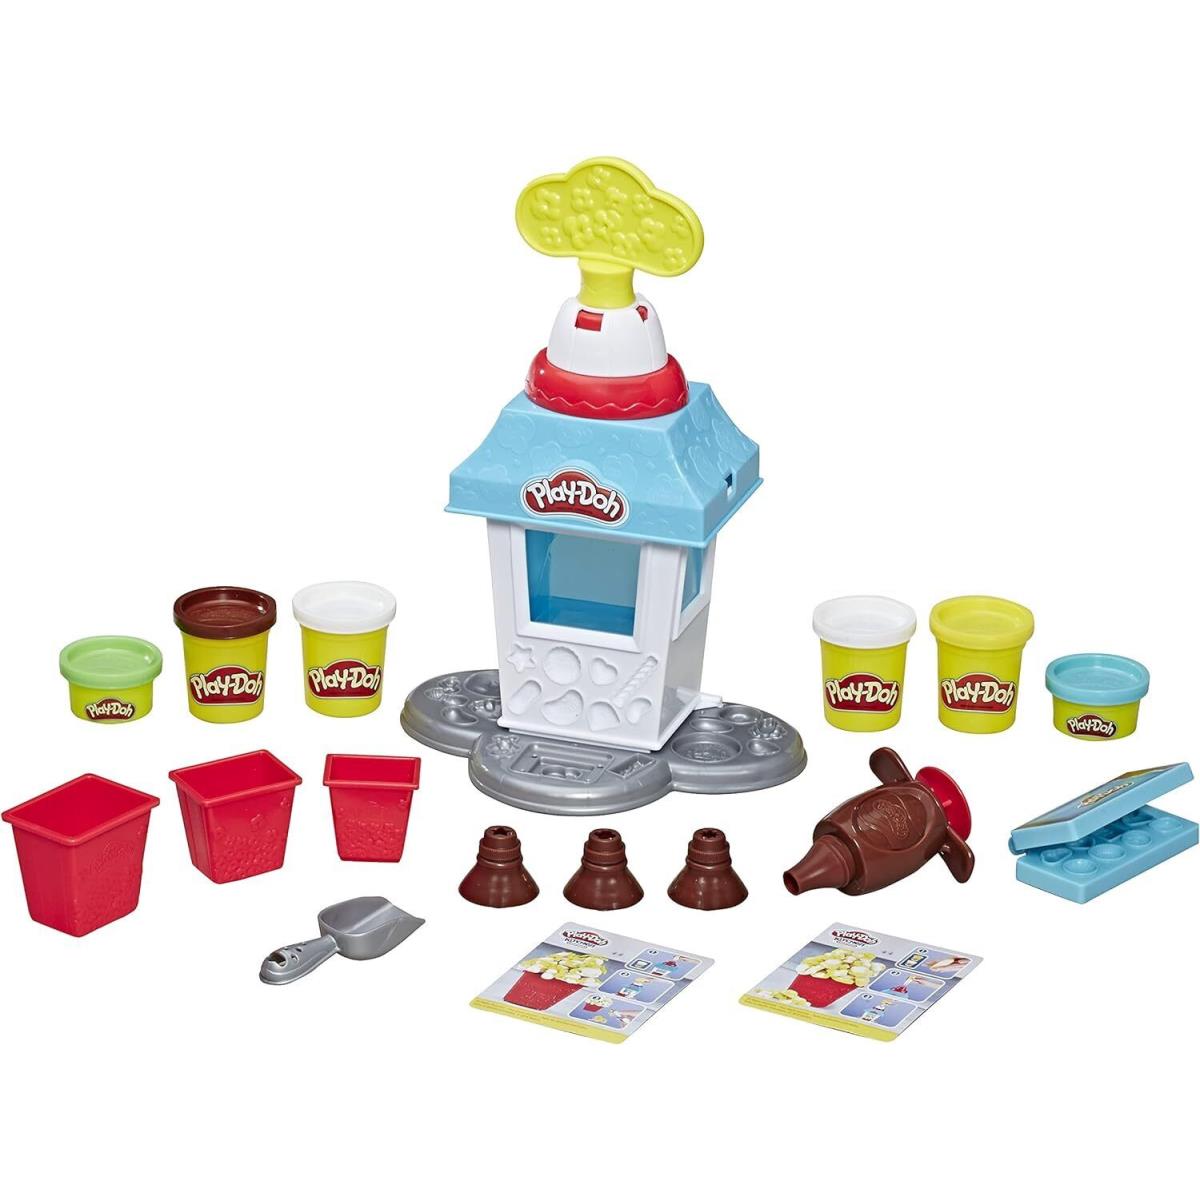 Play-doh Kitchen Creations Popcorn Party Play Food Set with 6 Cans